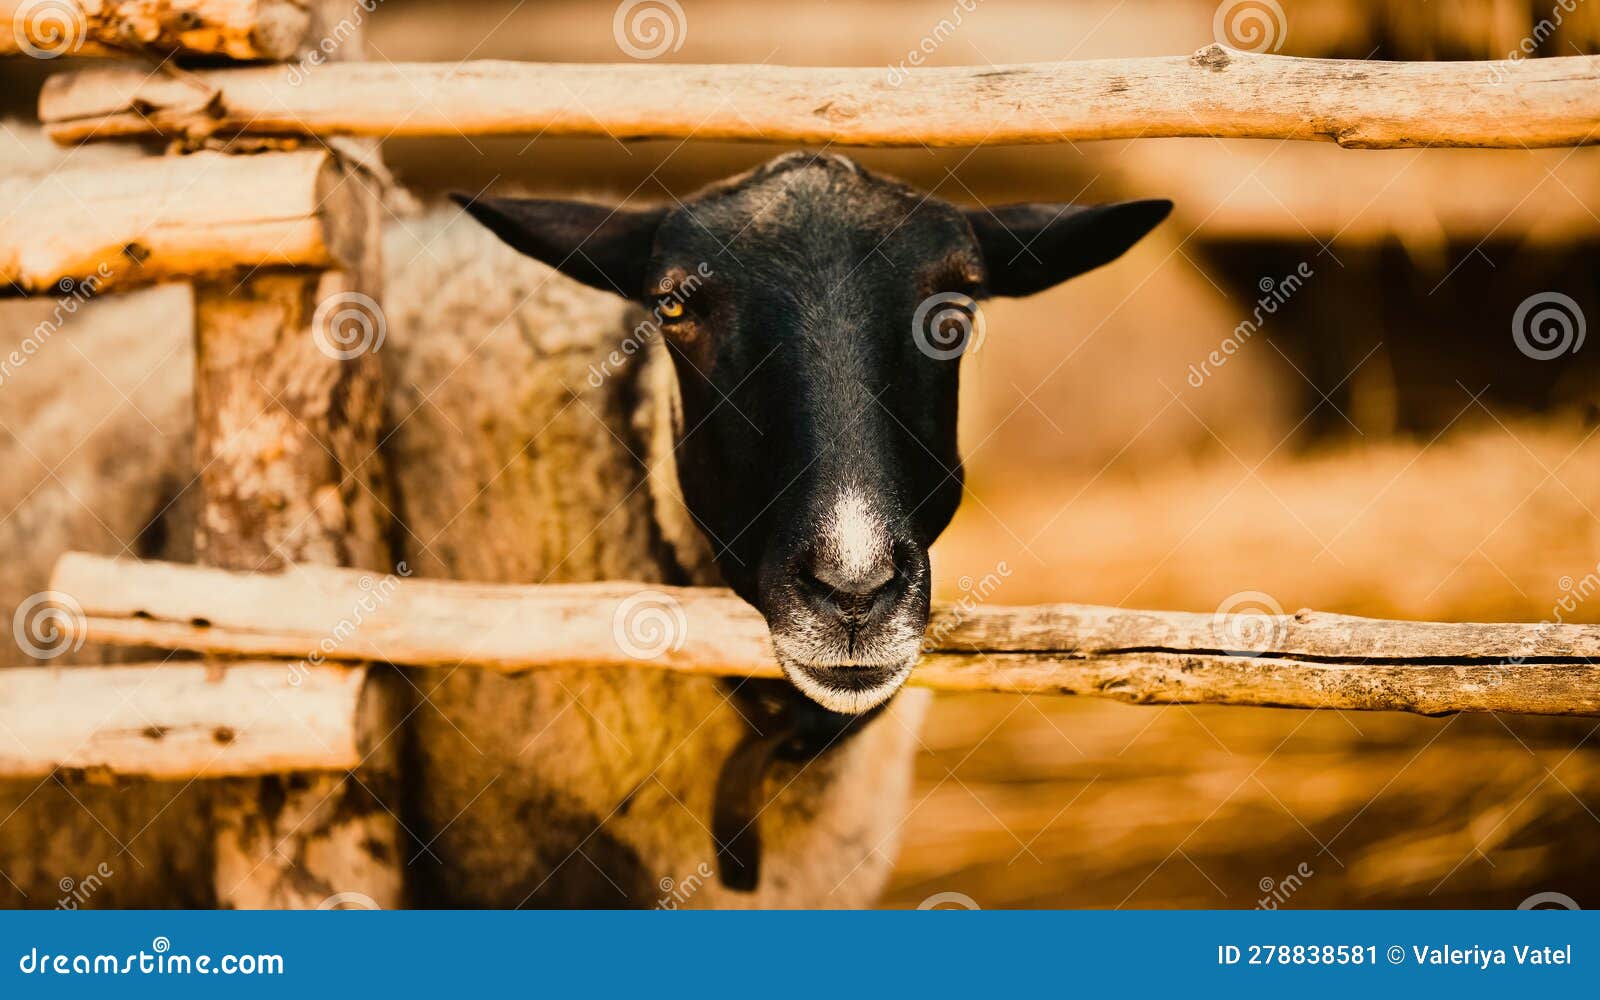 a sheep of a rustic farm. this image is a poignant reminder of the invaluable role of agriculture in sustaining humanity.